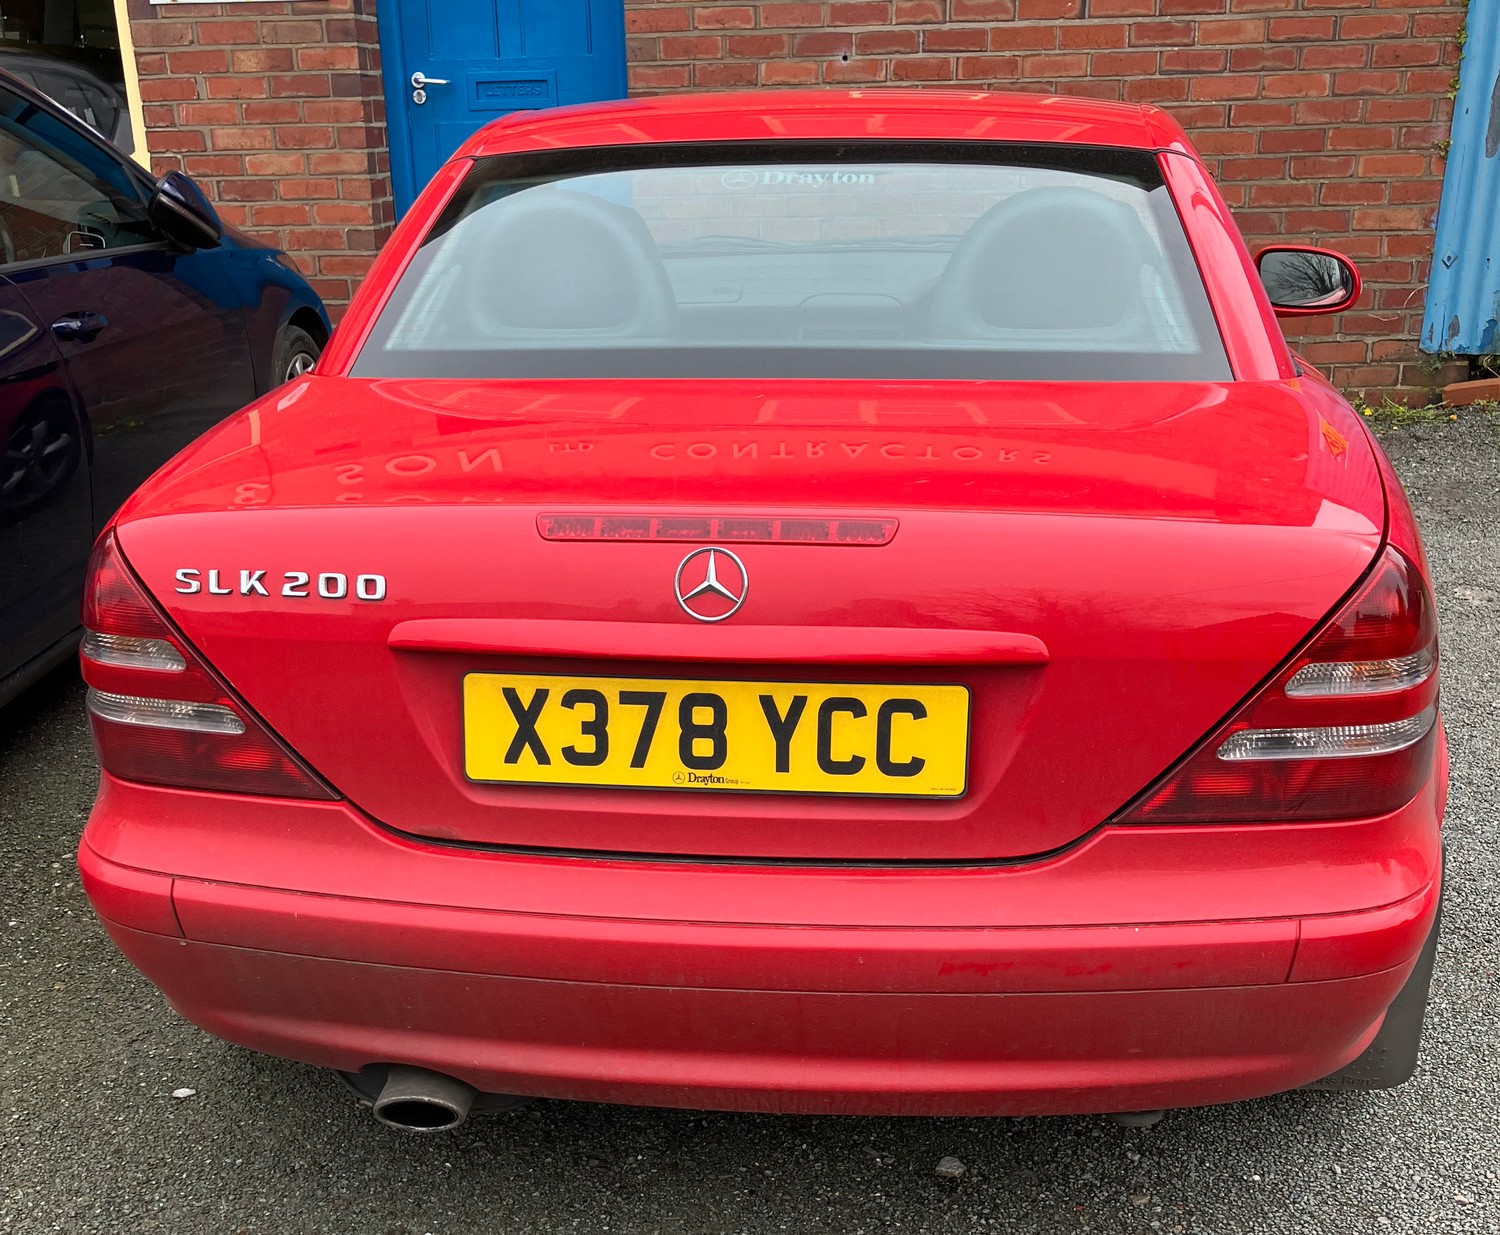 2000 Mercedes SLK 200 Kompressor Auto convertible in red with 1998cc petrol engine. REG: X378 YCC. - Image 3 of 3